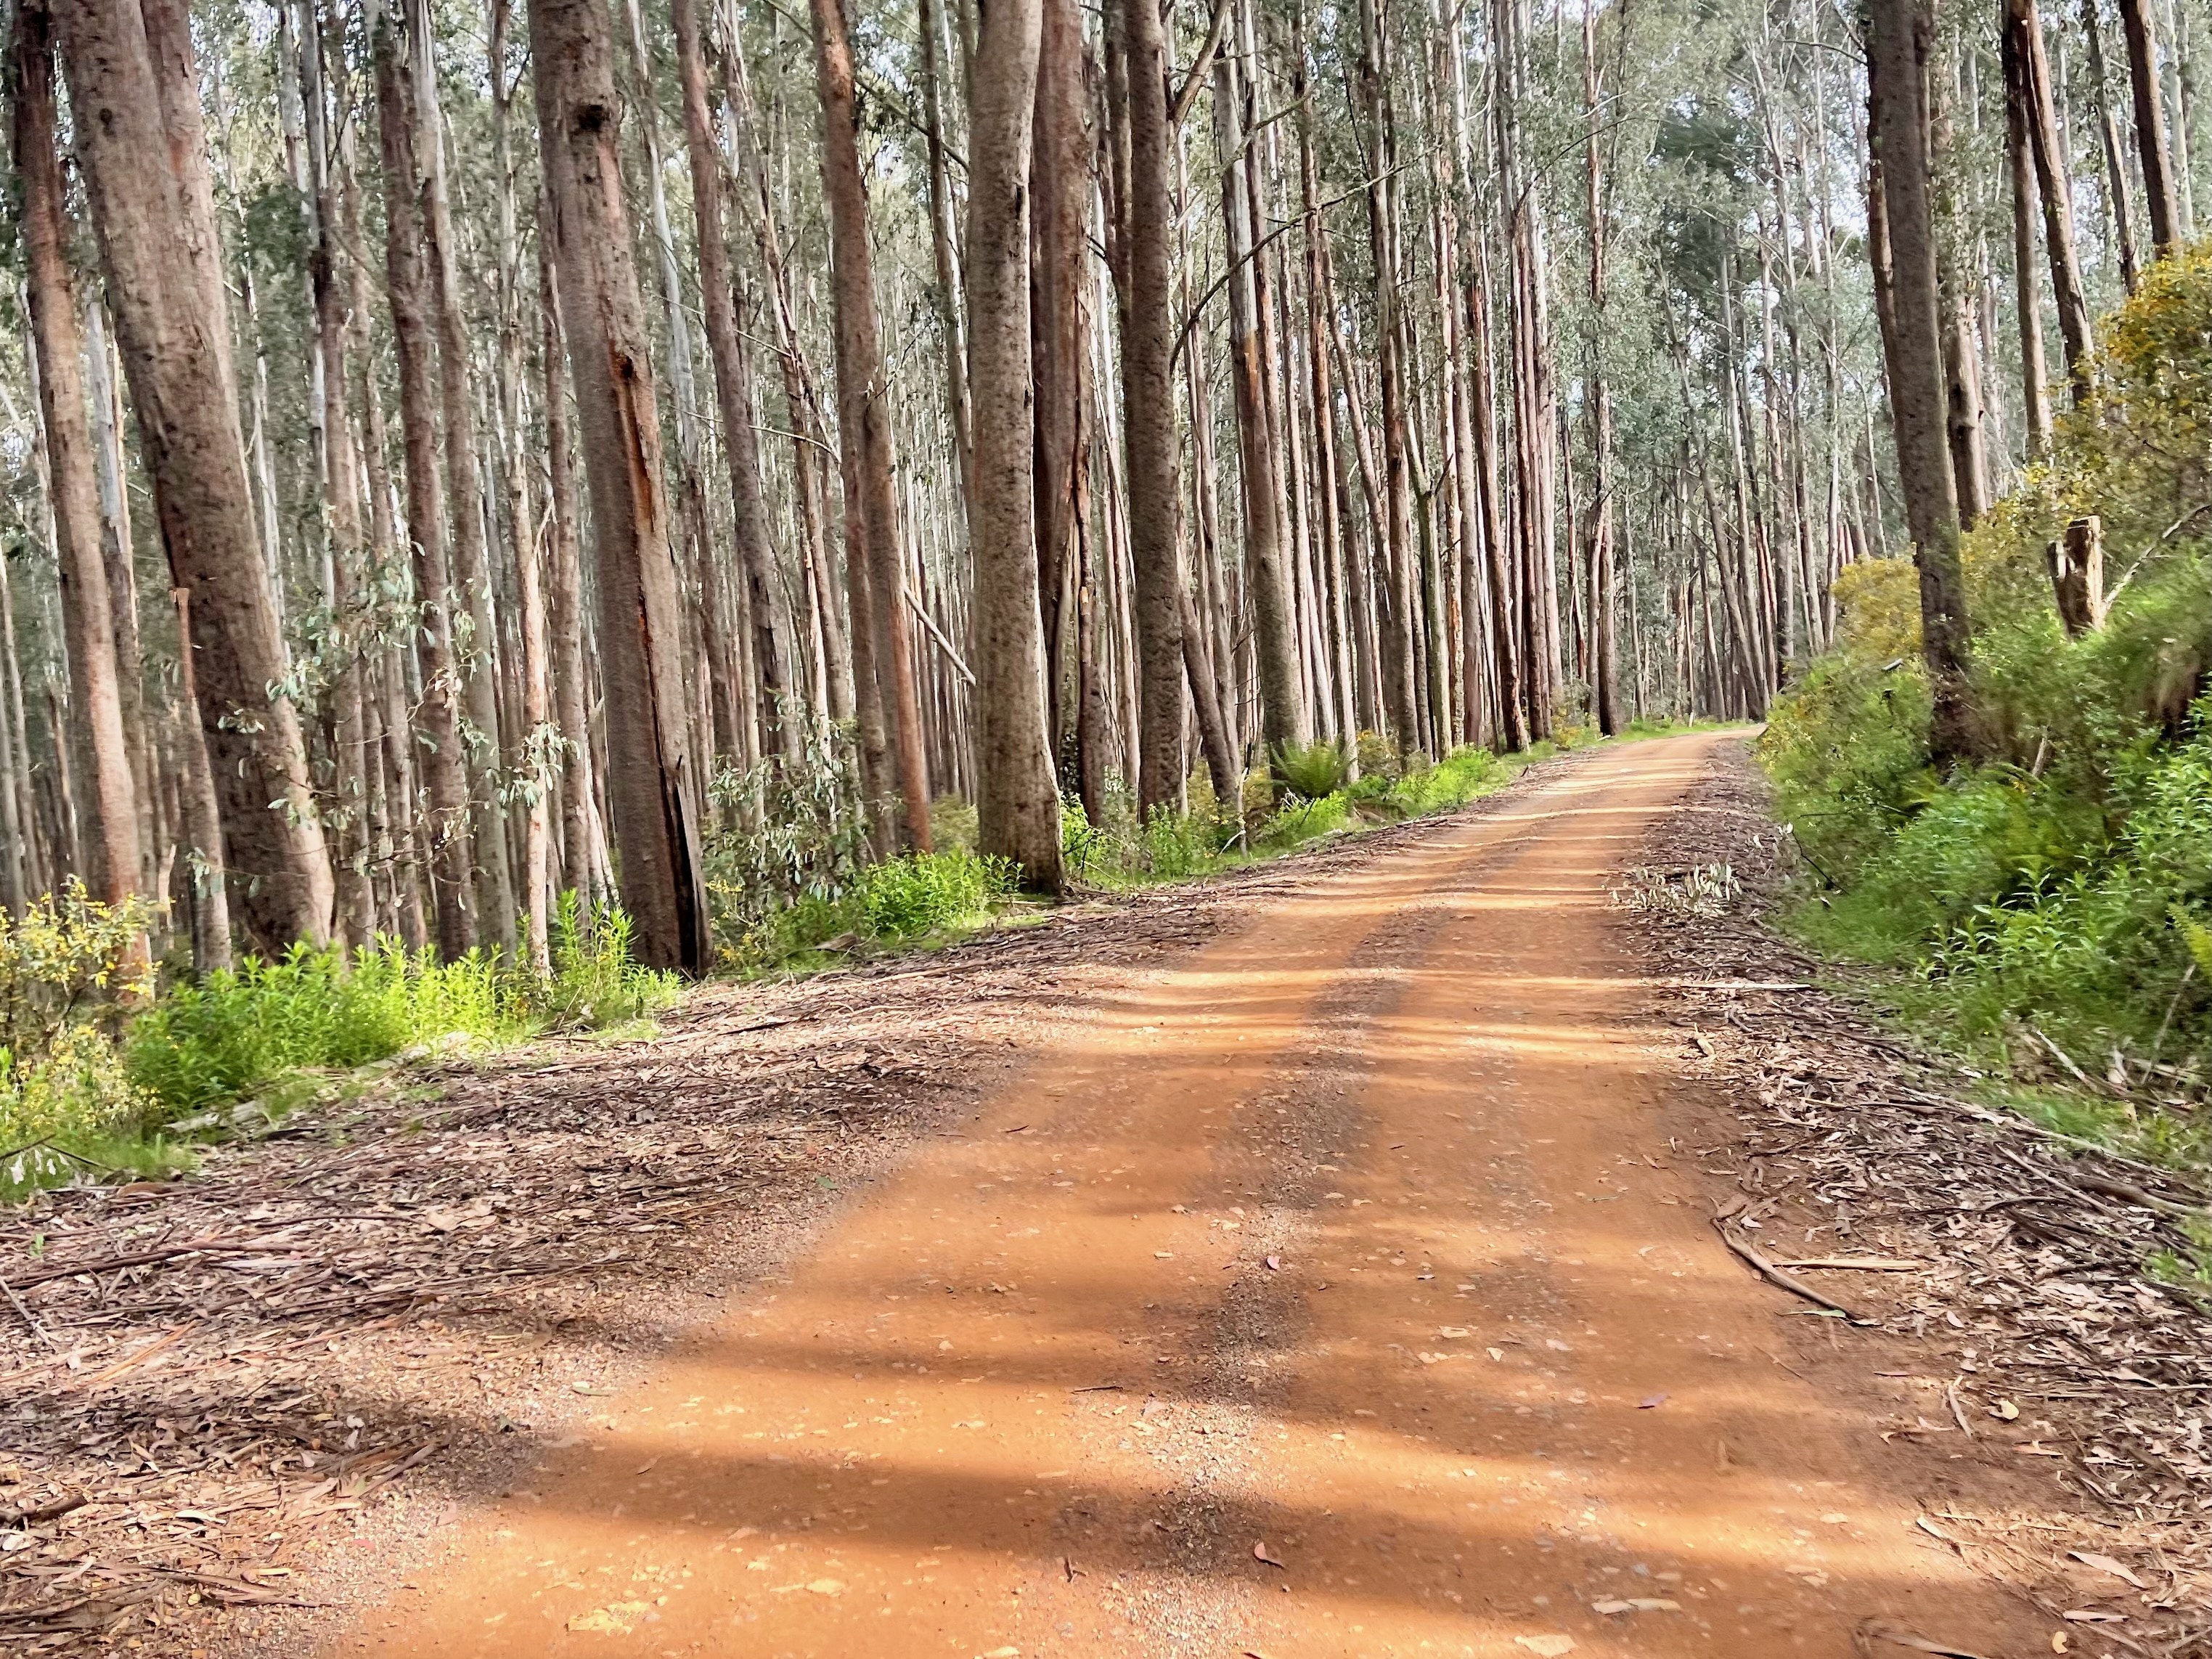 A gently rising smooth dirt road surrounded by tall native trees 